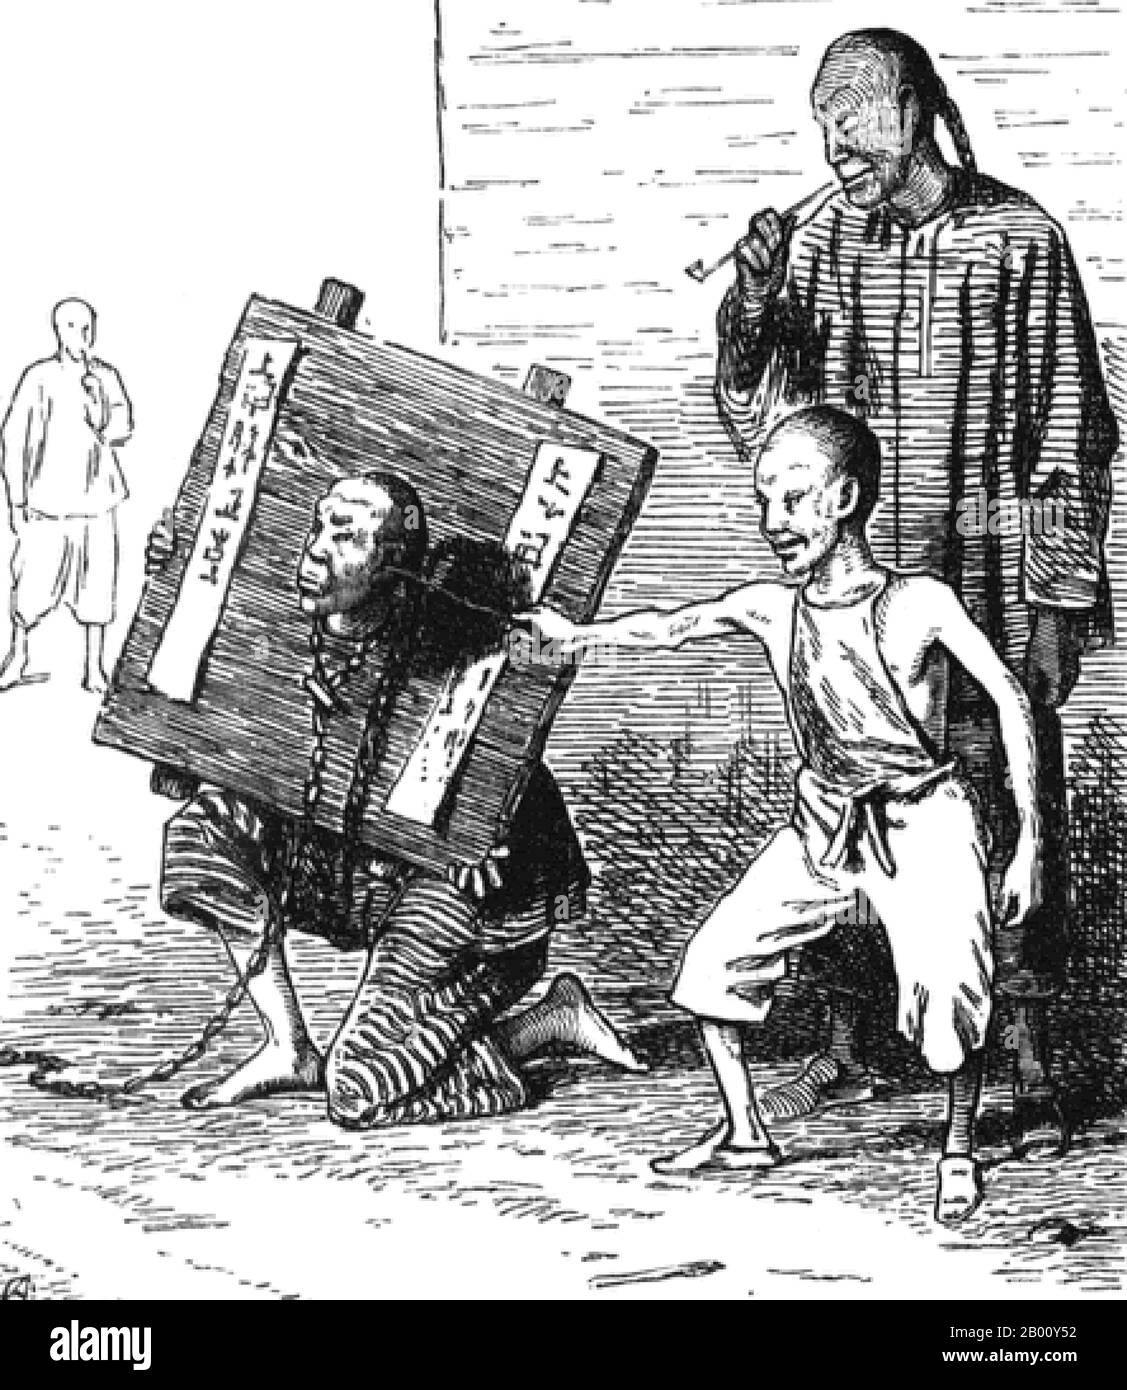 China: Child taunting a prisoner in a cangue, late 19th century.  A cangue was a device that was used for public humiliation and corporal punishment in China and some other parts of East Asia and Southeast Asia until the early years of the 20th century. It was somewhat similar to the pillory used for punishment in the West, except that the board of the cangue was not fixed to a base, and had to be carried around by the prisoner. Stock Photo